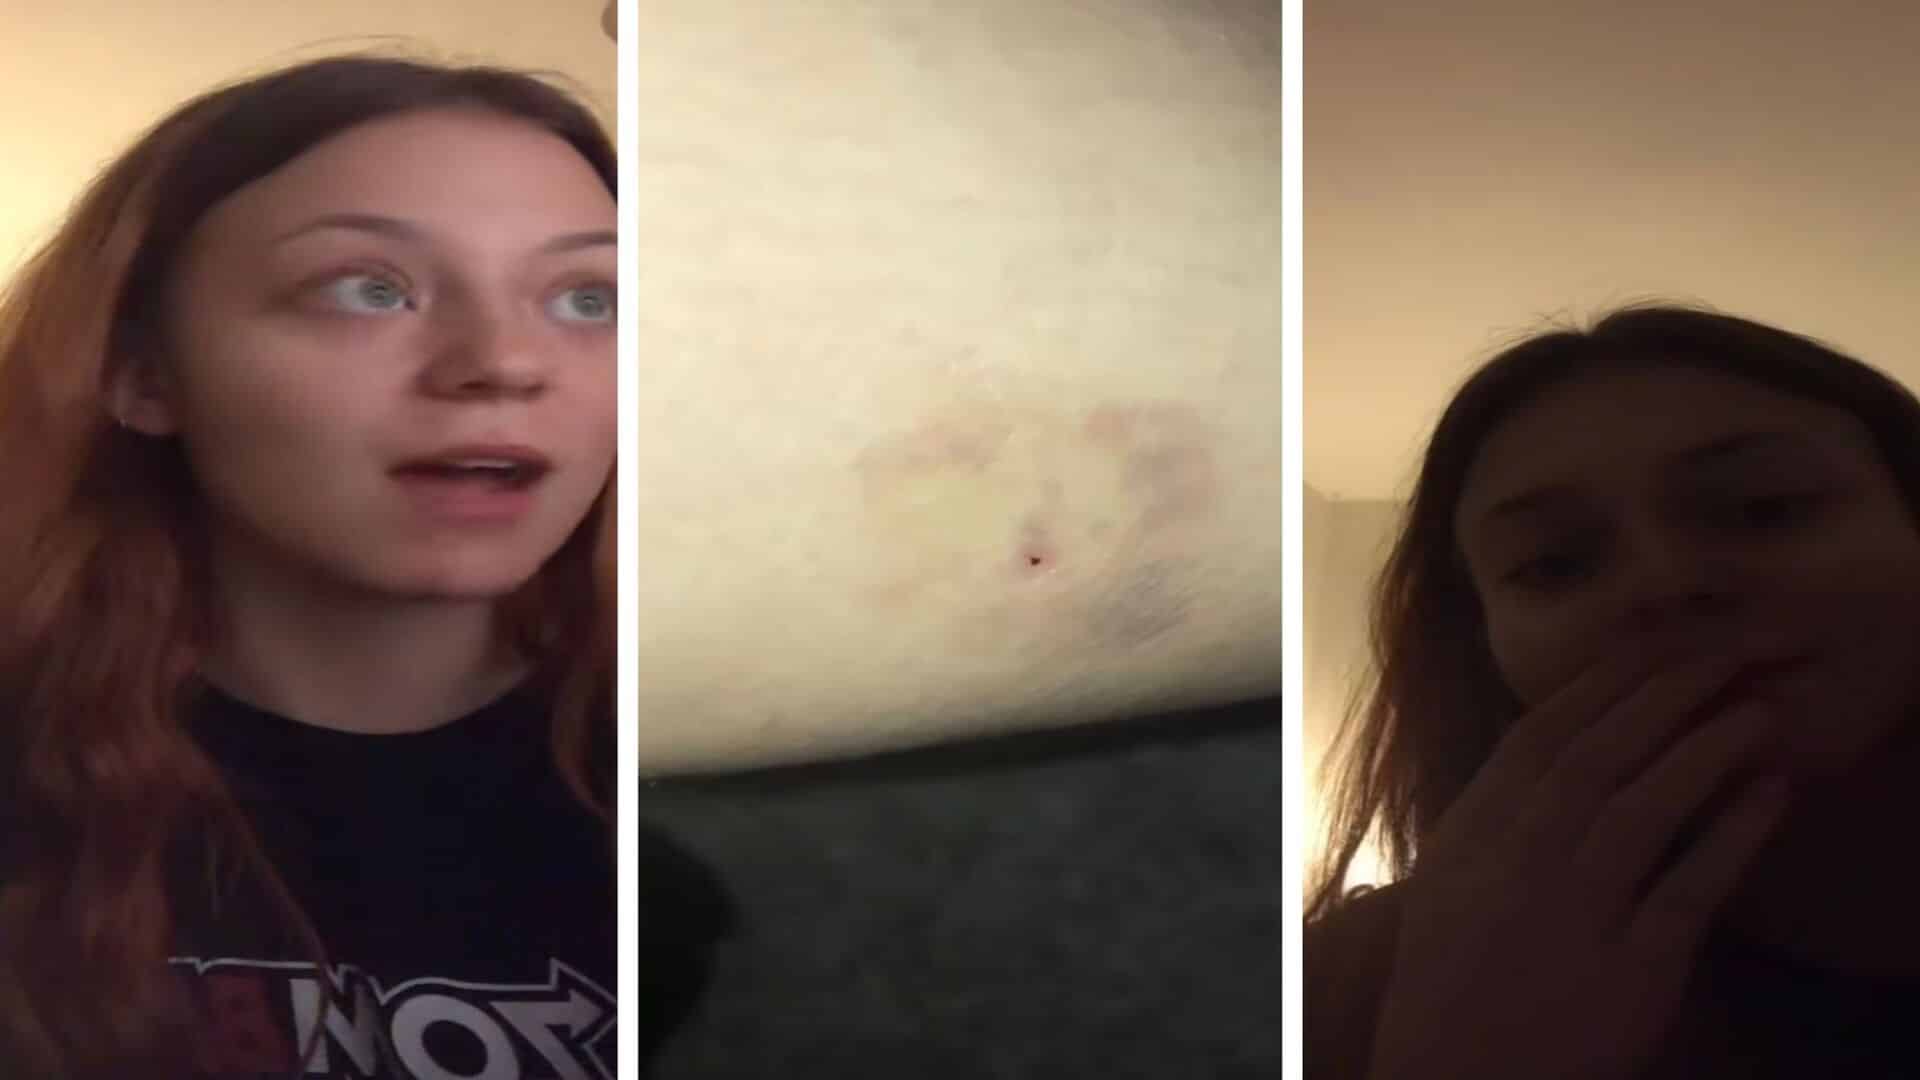 TikToker Believes She was Illegally Injected after watching a TikTok